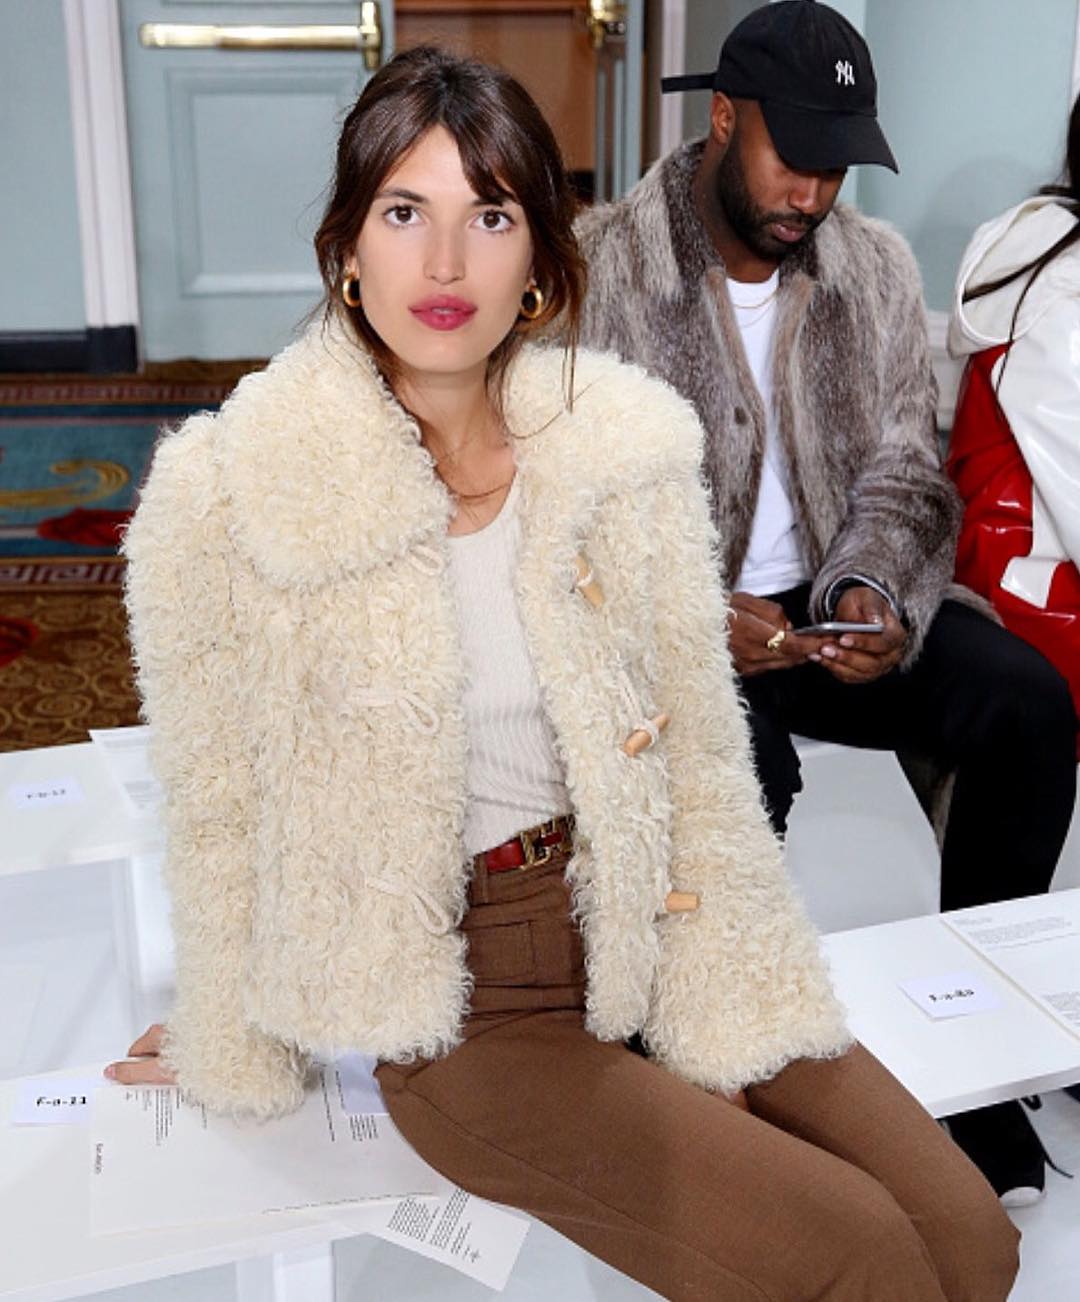 French Girl Outfit Idea— Jeanne Damas in a Shearling Jacket, White Ribbed Top and Brown Pants